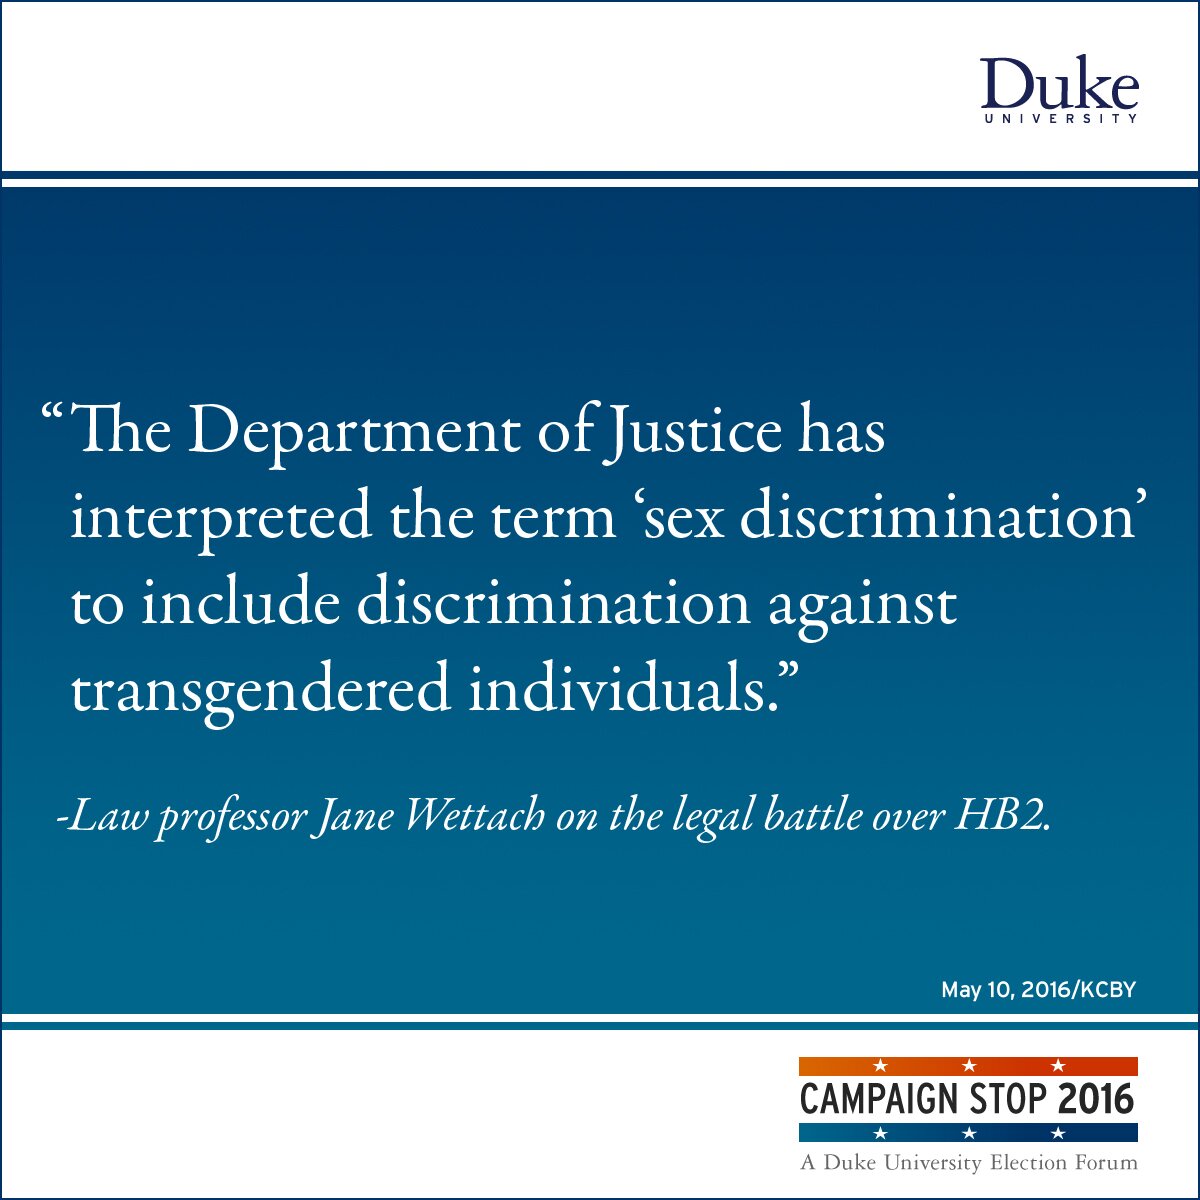 "The Department of Justice has interpreted the term ‘sex discrimination’ to include discrimination against transgendered individuals." Law professor Jane Wettach on the legal battle over HB2.